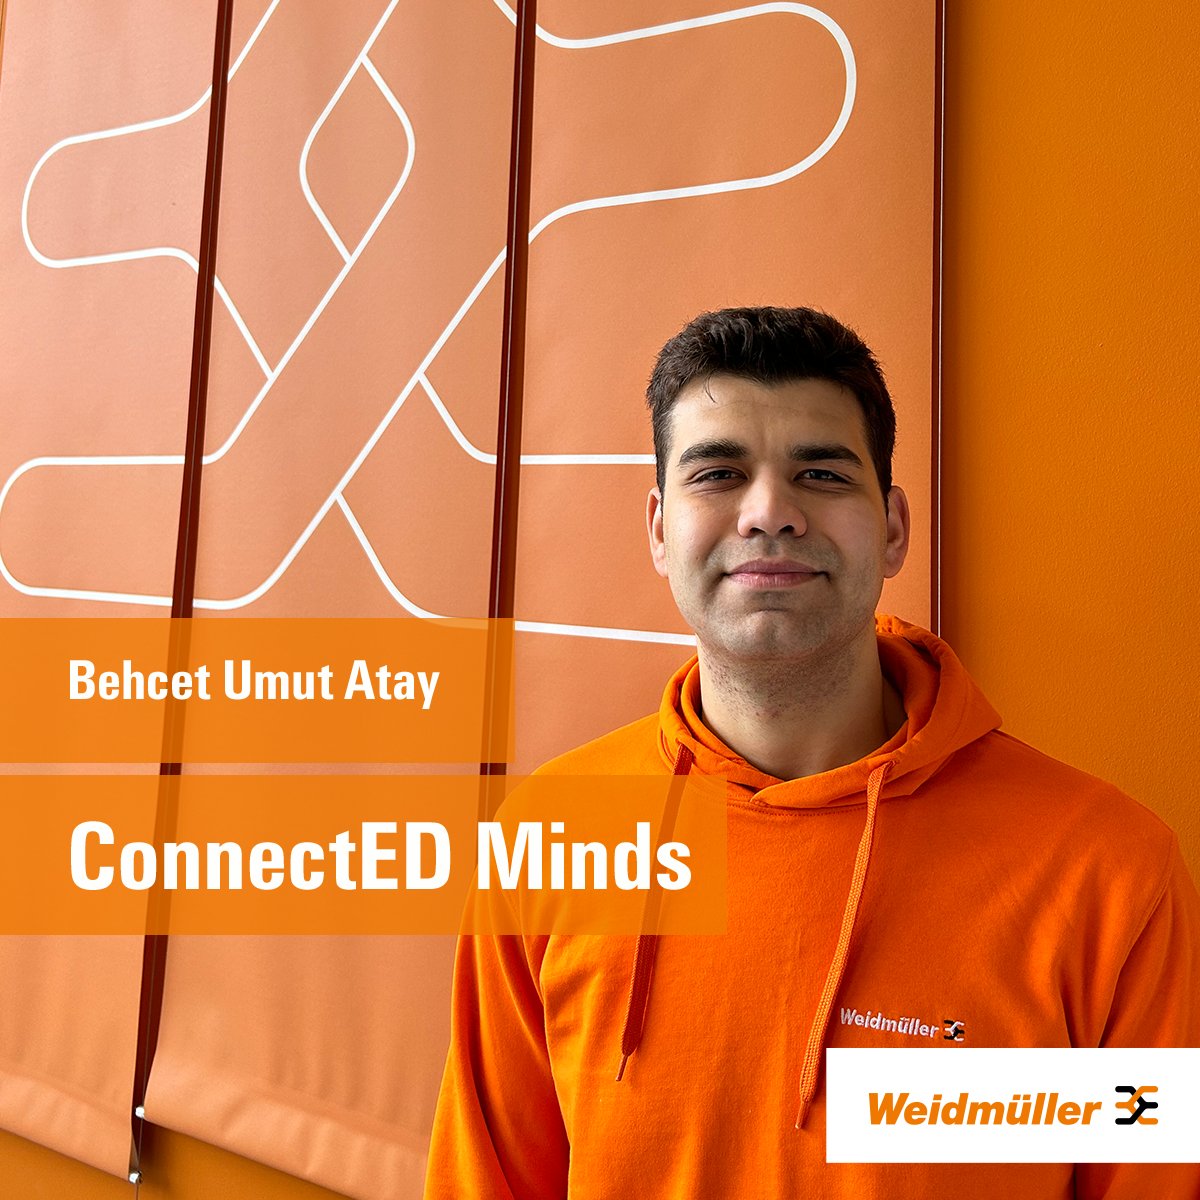 Today marks Umut’s last day at Weidmuller UK as he completes his placement from the ConnectED Minds programme.
Join us in wishing Umut all the best in his future endeavors!
#Weidmuller #ConnectEDminds   #education #thefuture